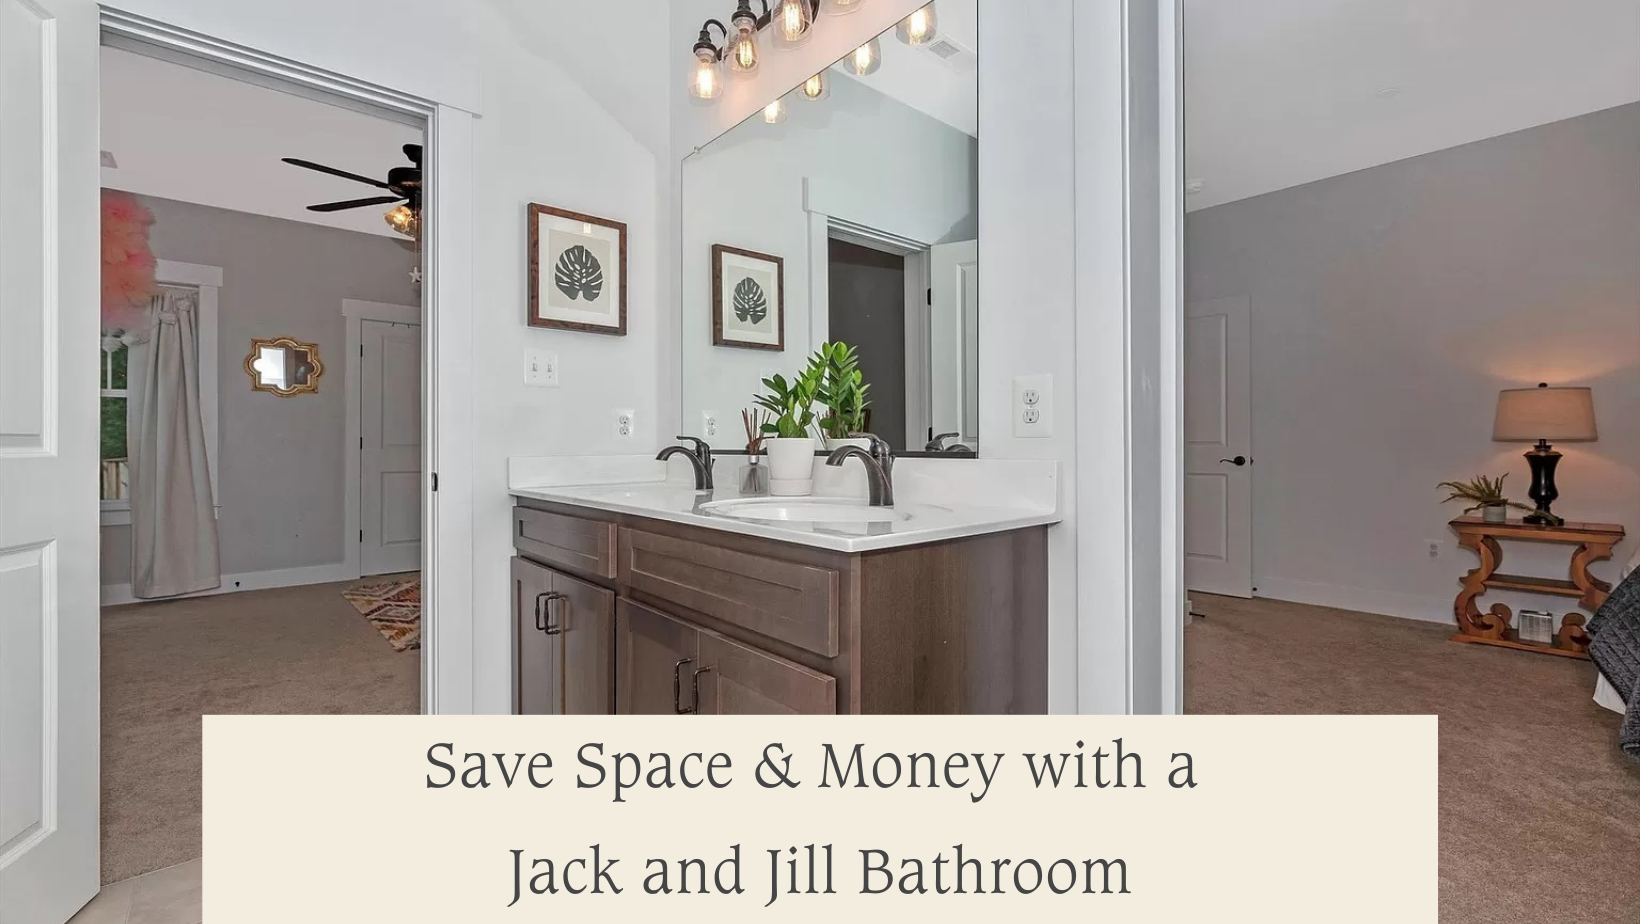 Save Space and Money with a Jack and Jill Bathroom